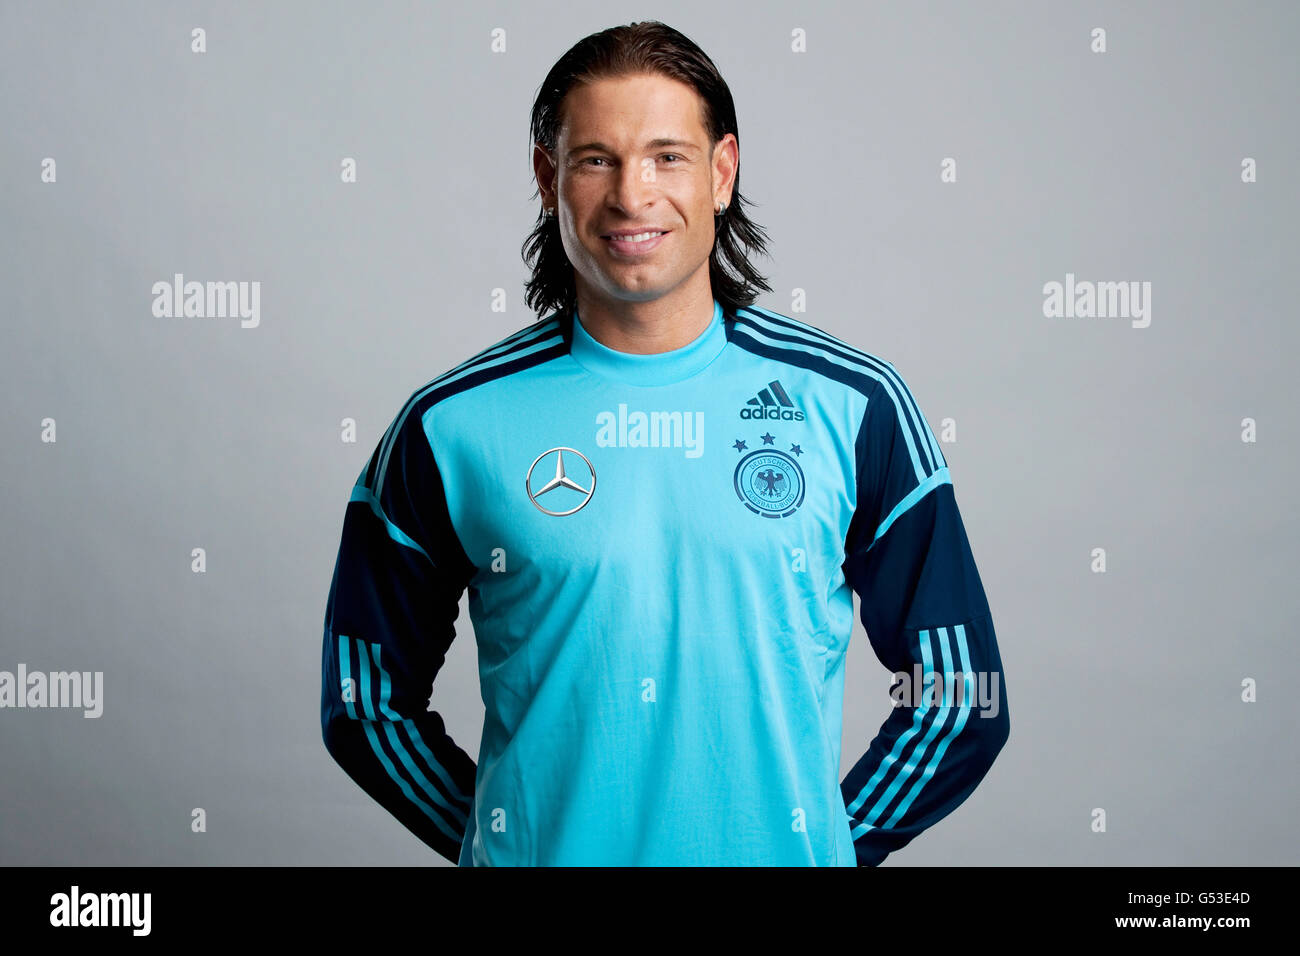 Goalkeeper Tim Wiese, at the official portrait photo session of the German men's national football team, on 14.11.2011, Hamburg Stock Photo